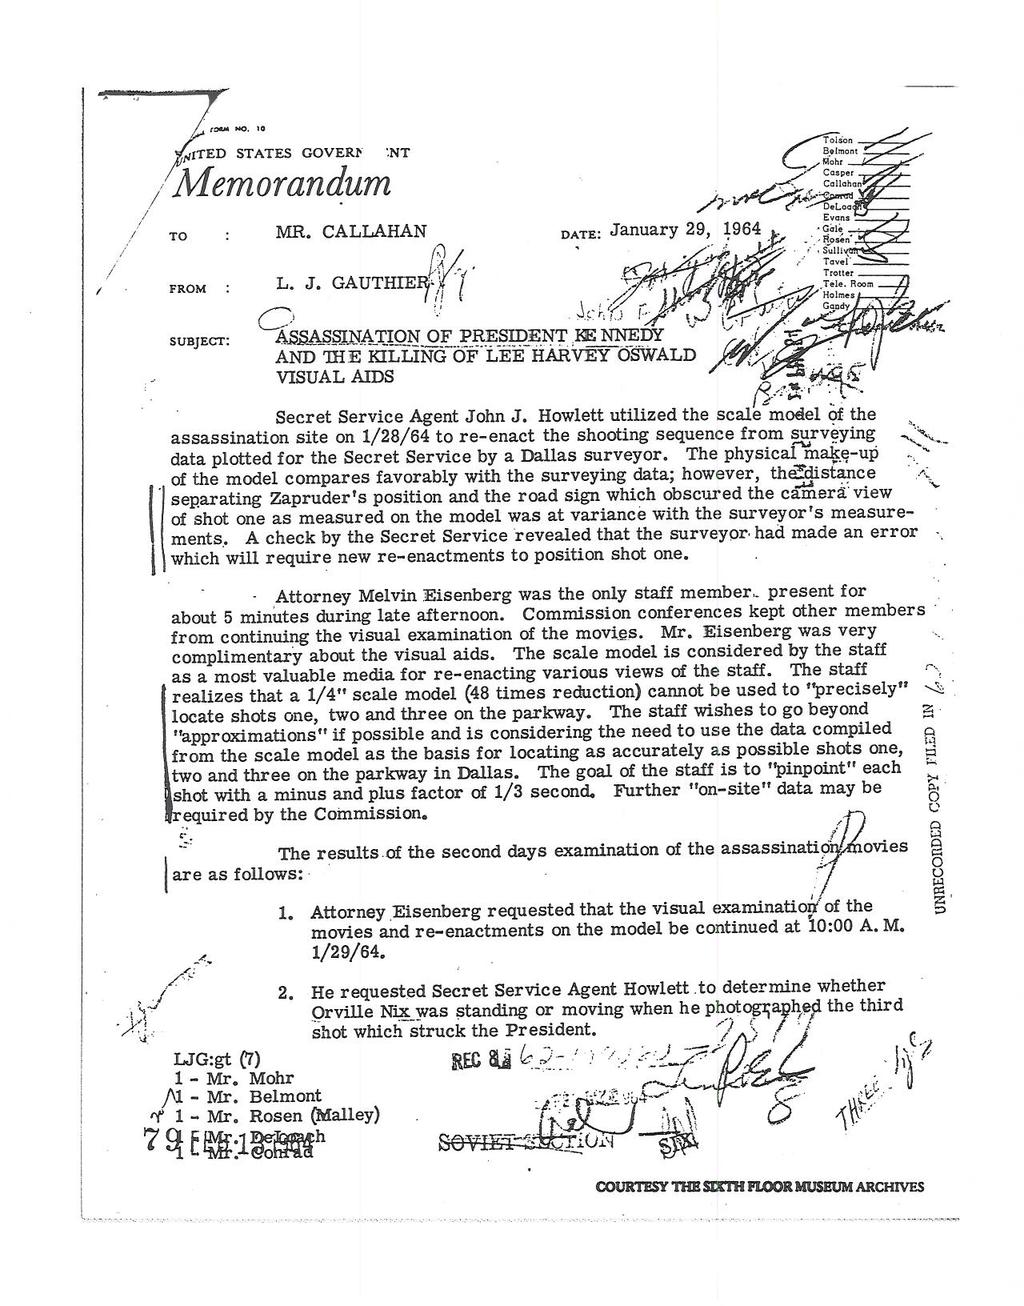 1.0000 1.4. 10 Tolion ITED STATES GOVERT Belmont ohrpe, Memorandum '7"<' c. TO MR. CALLAHAN DATE January 29, 1964 FROM L. J. GAUTHTE.g f, SUBJECT MBA. S_g_NATIONOF.